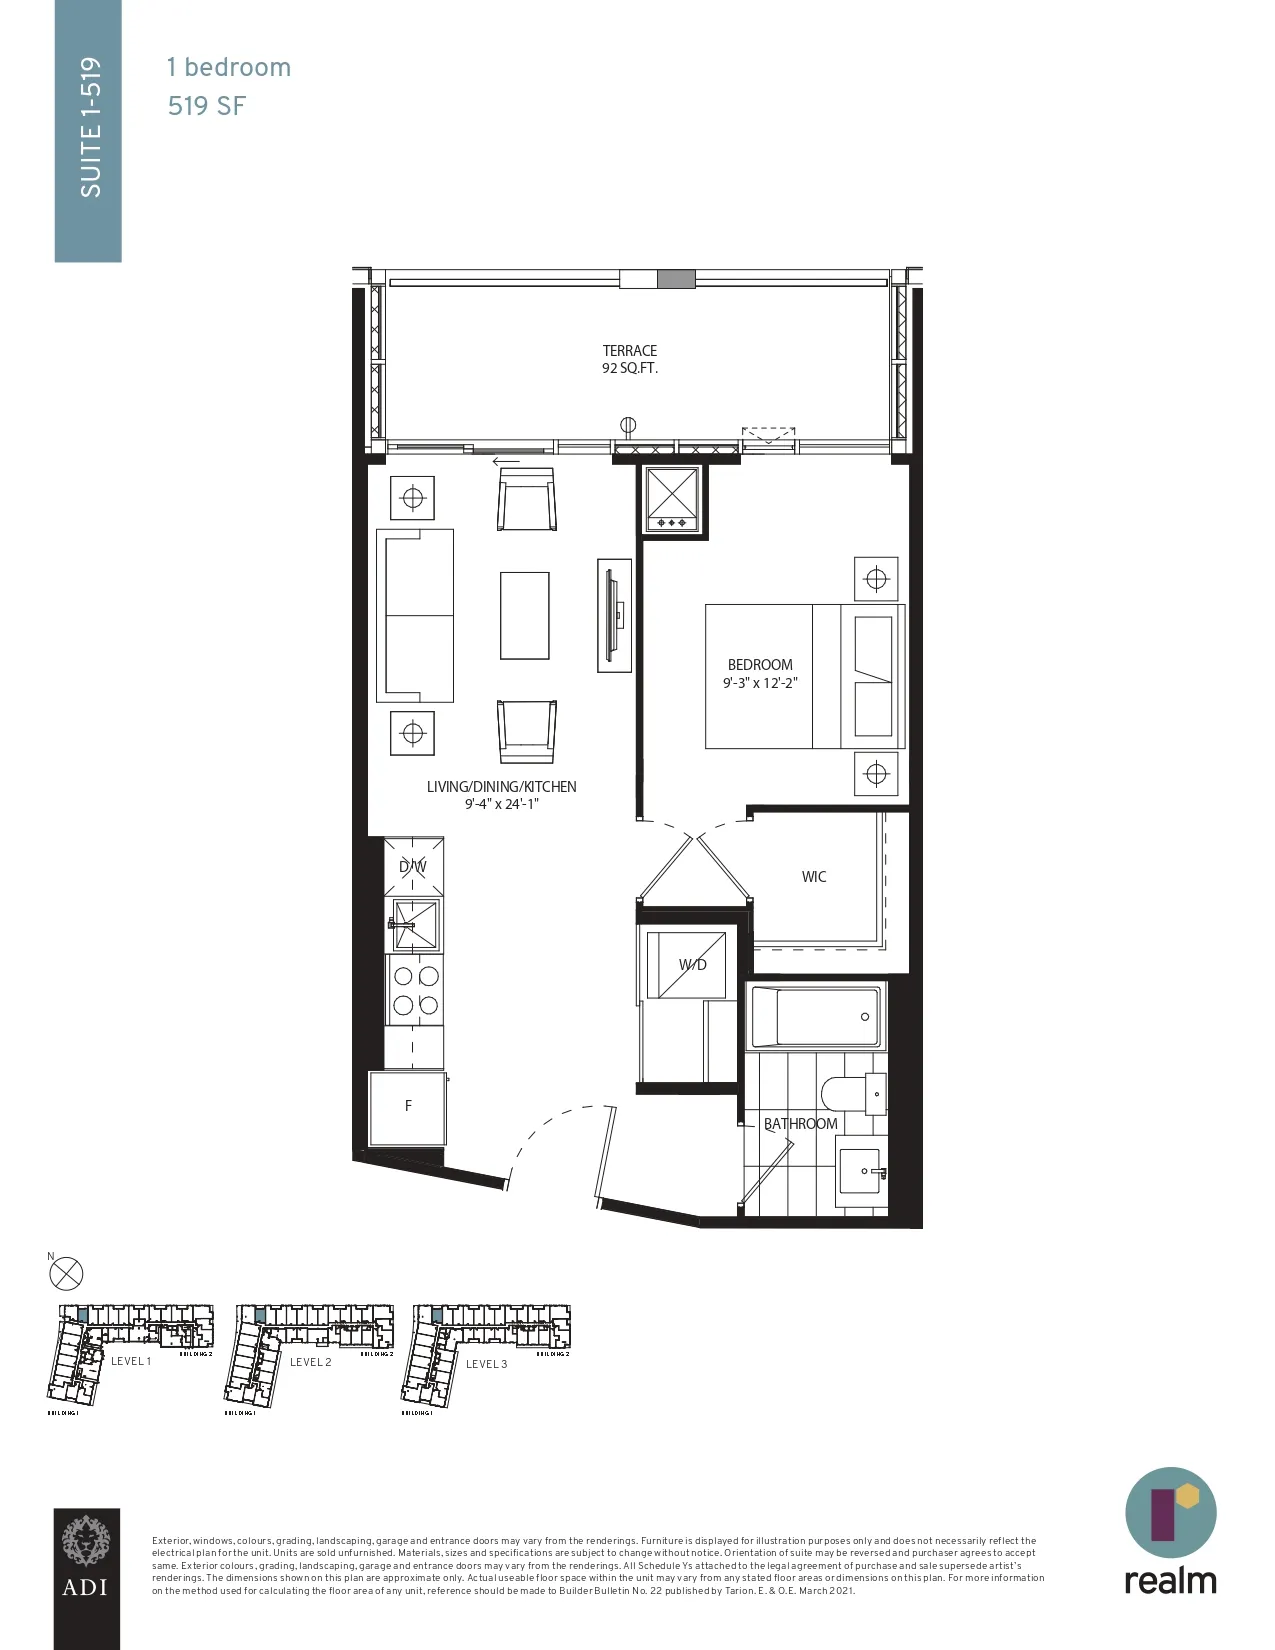  Floor Plan of Realm Condos with undefined beds